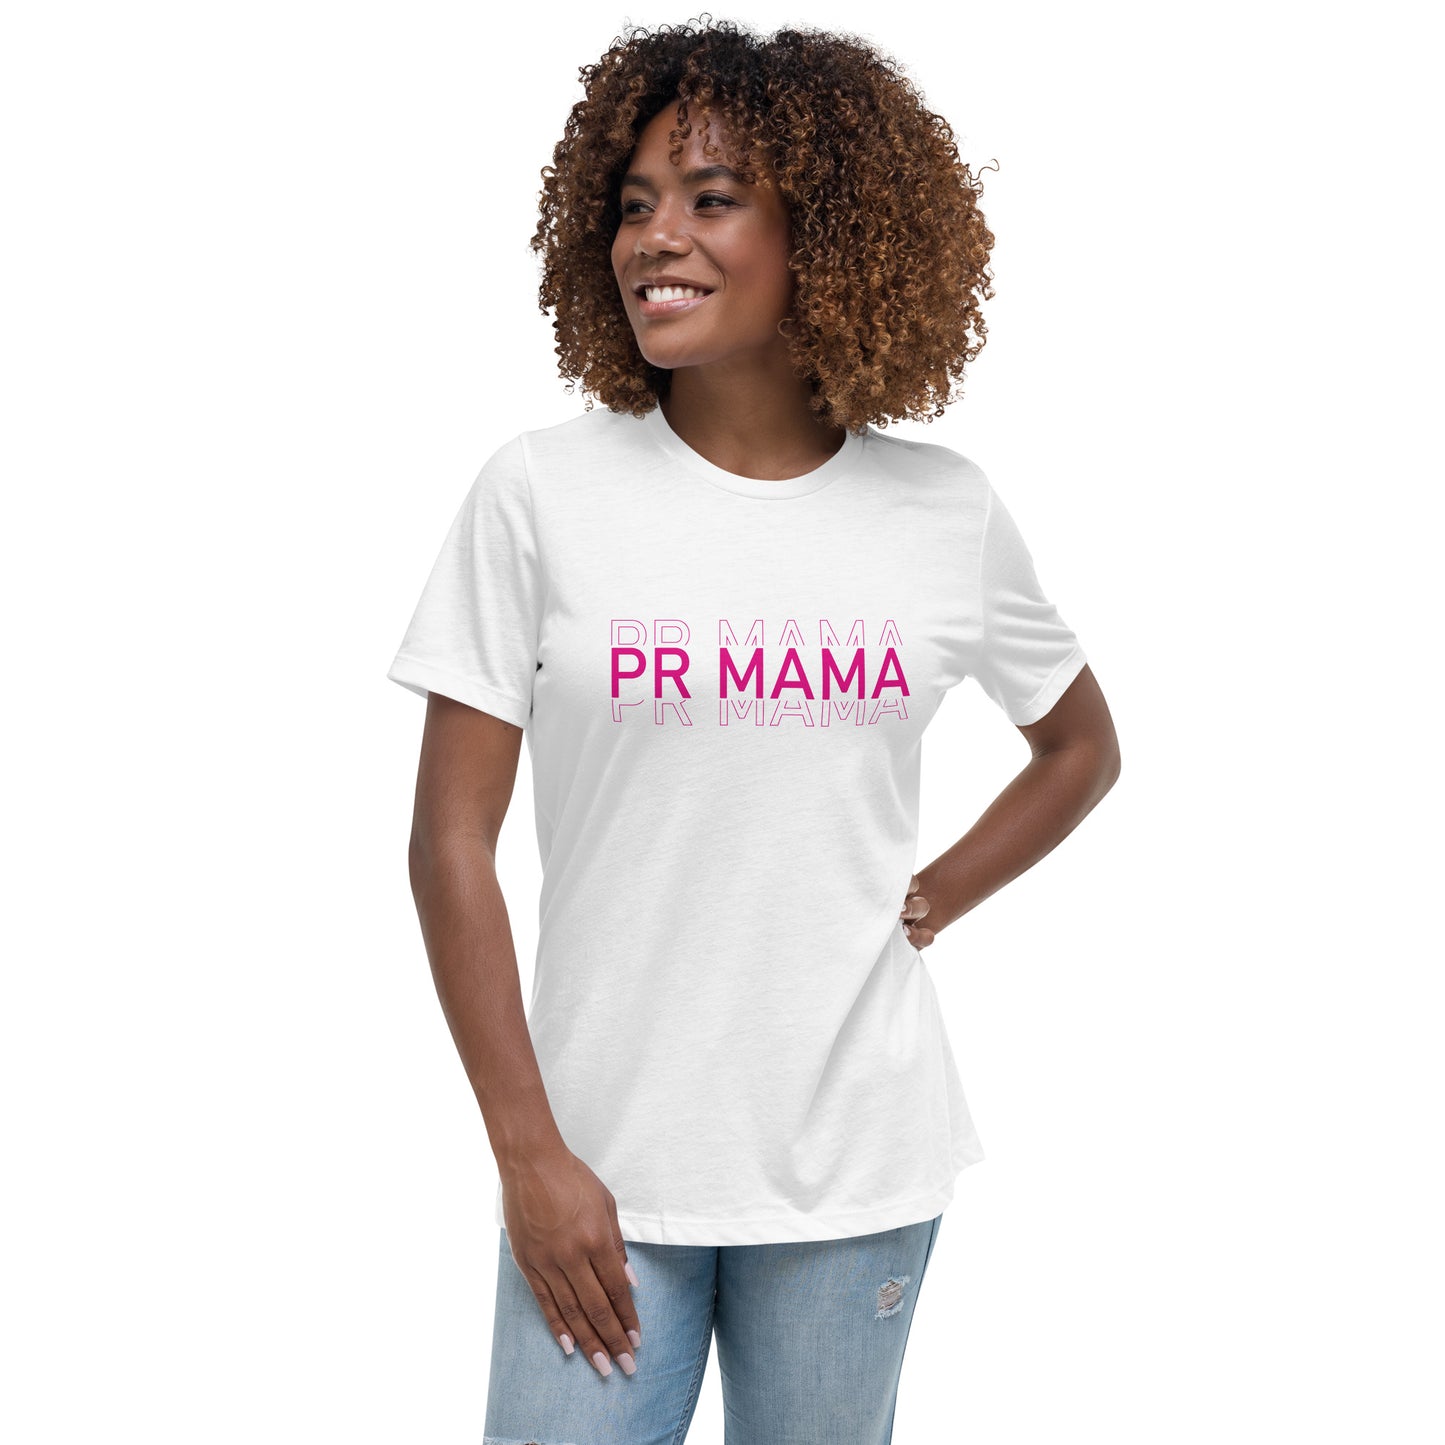 PR MAMA Printed Women's Relaxed T-Shirt